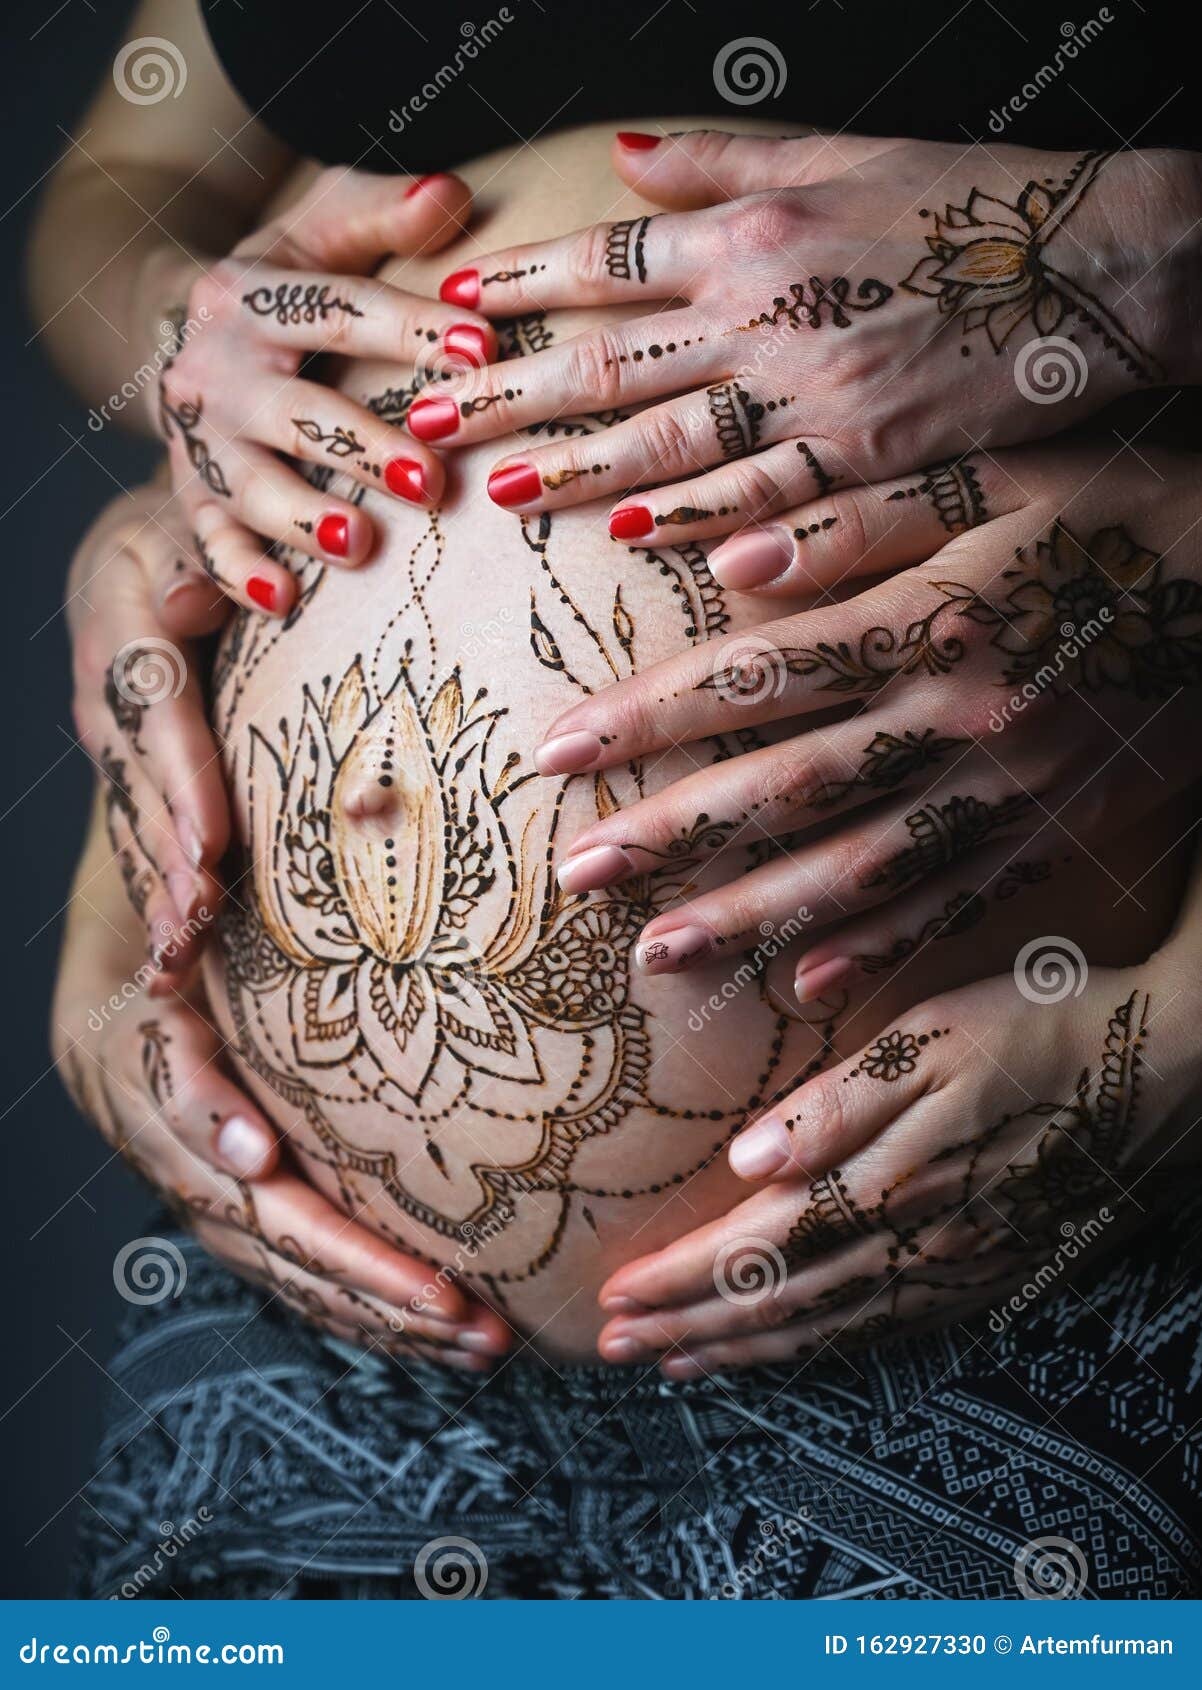 443 Henna Tattoo Pregnant Images Stock Photos  Vectors  Shutterstock